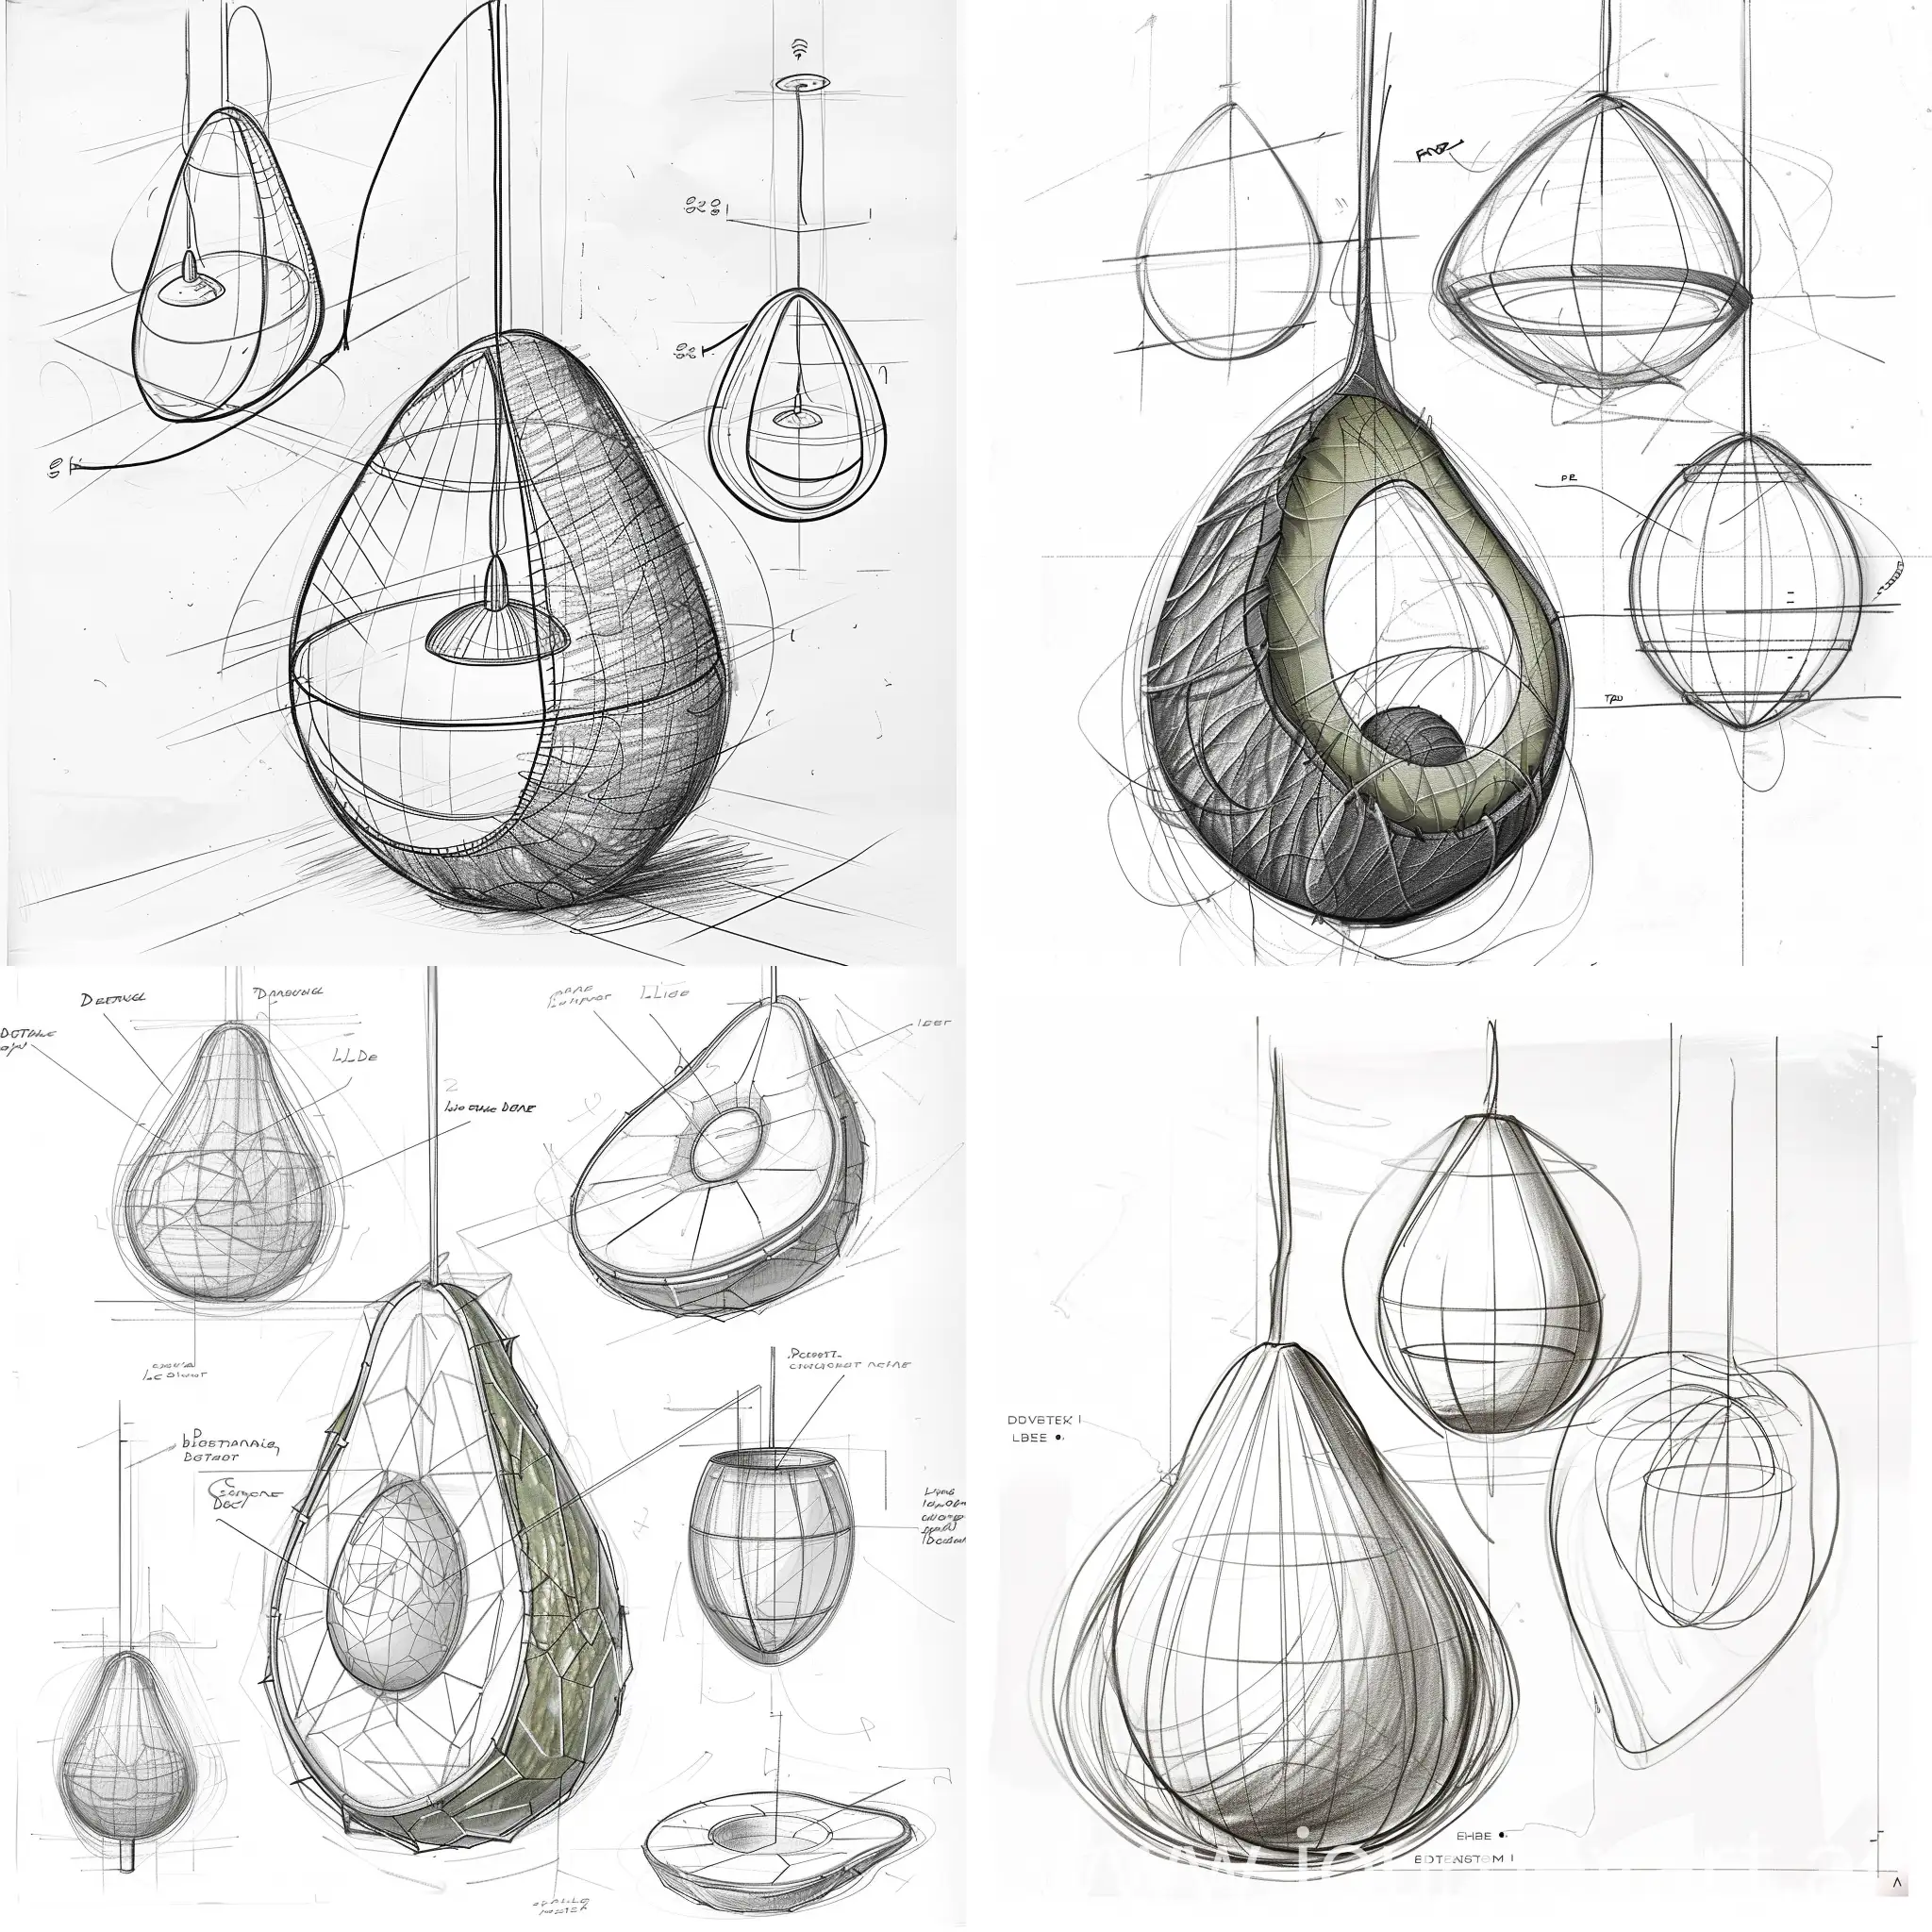 Hand-drawn product design, lighting design, extract avocado shape, craft lines, simplicity, line extraction, Tumbler lighting design sketch
Bionic its texture bionic modeling deductive change process, modeling source, modeling change, refinement, summary process, how to draw lamps, chandeliers, drawing reference, product design sketch, white background, front view, side view, rear view, wire frame, sketch from different angles, pencil line manuscript, each program should present form source and intent, and form change deliberation process; And how to reconstruct and evolve primitive body forms. Main view detail